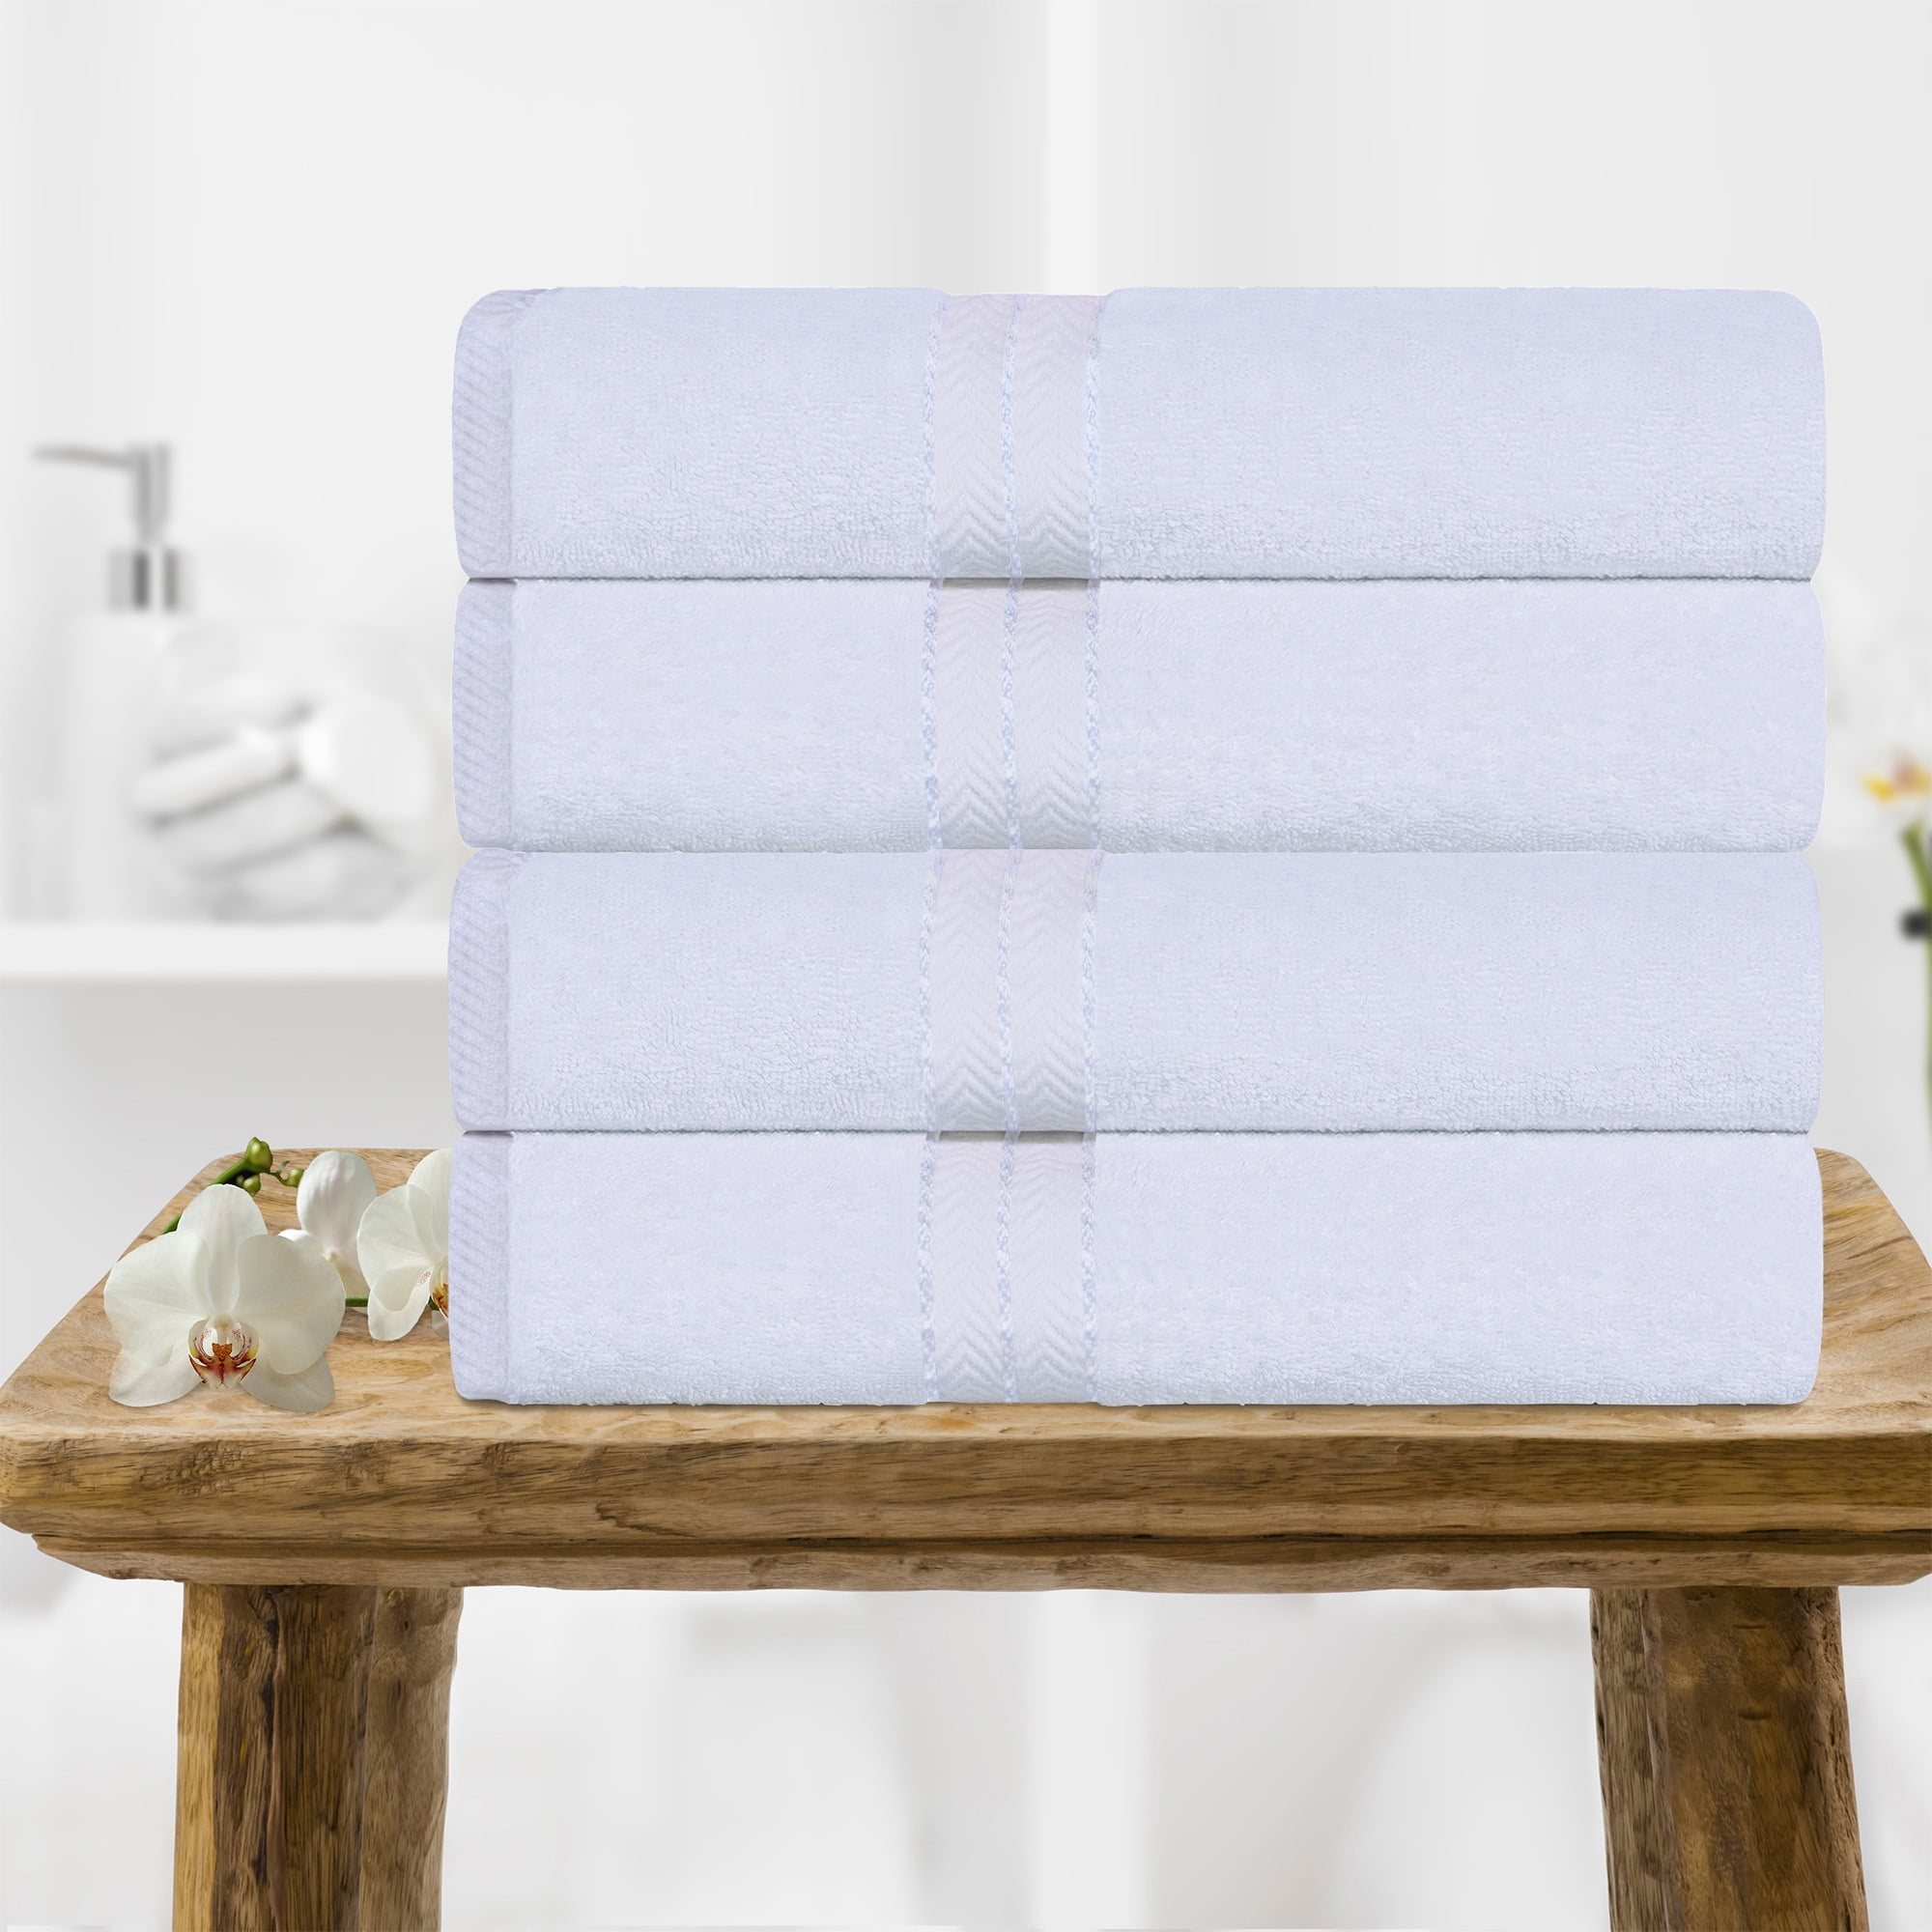 Aston & Arden Eco-Friendly Aegean Bath Towels (2 Pack), Recycled Ultra  Plush Turkish Cotton, 30x60 in., White with Light Grey Striped Woven Dobby  